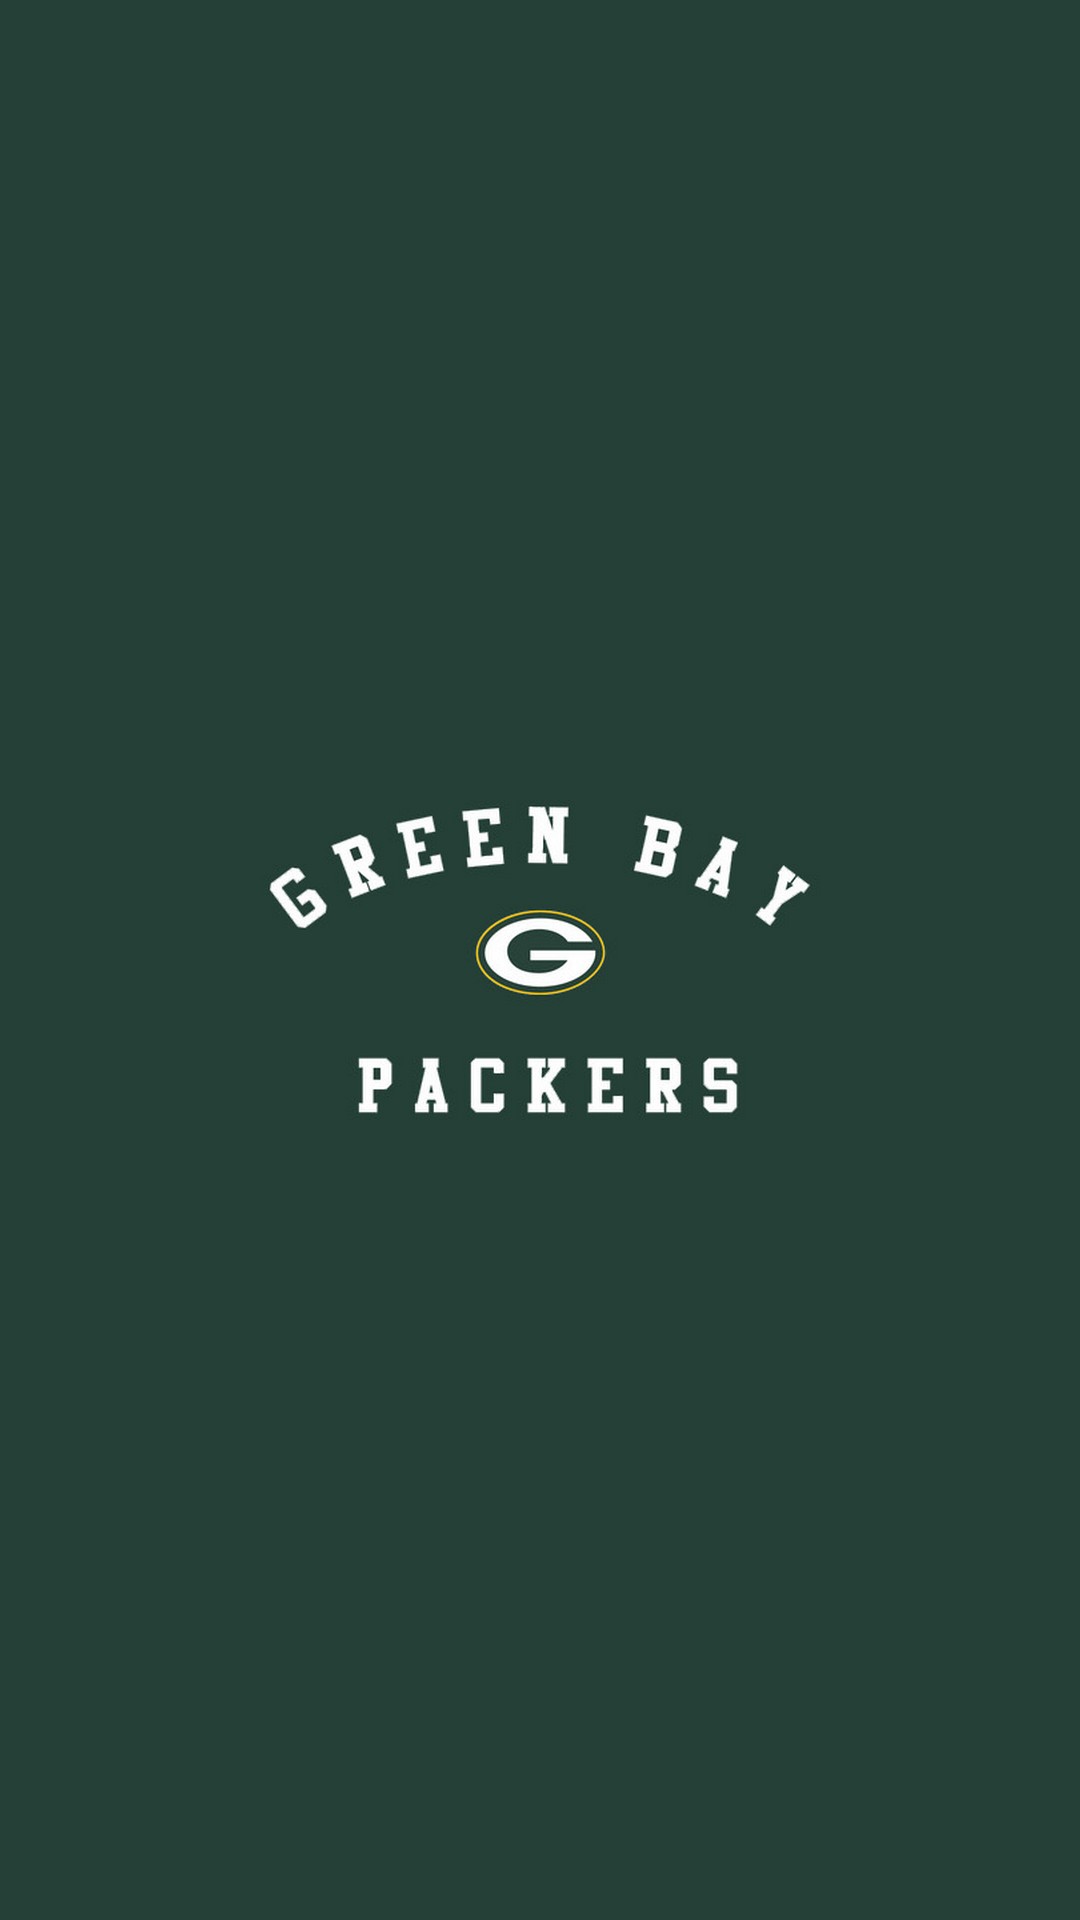 Green Bay Packers iPhone Wallpaper with high-resolution 1080x1920 pixel. Download and set as wallpaper for Apple iPhone X, XS Max, XR, 8, 7, 6, SE, iPad, Android